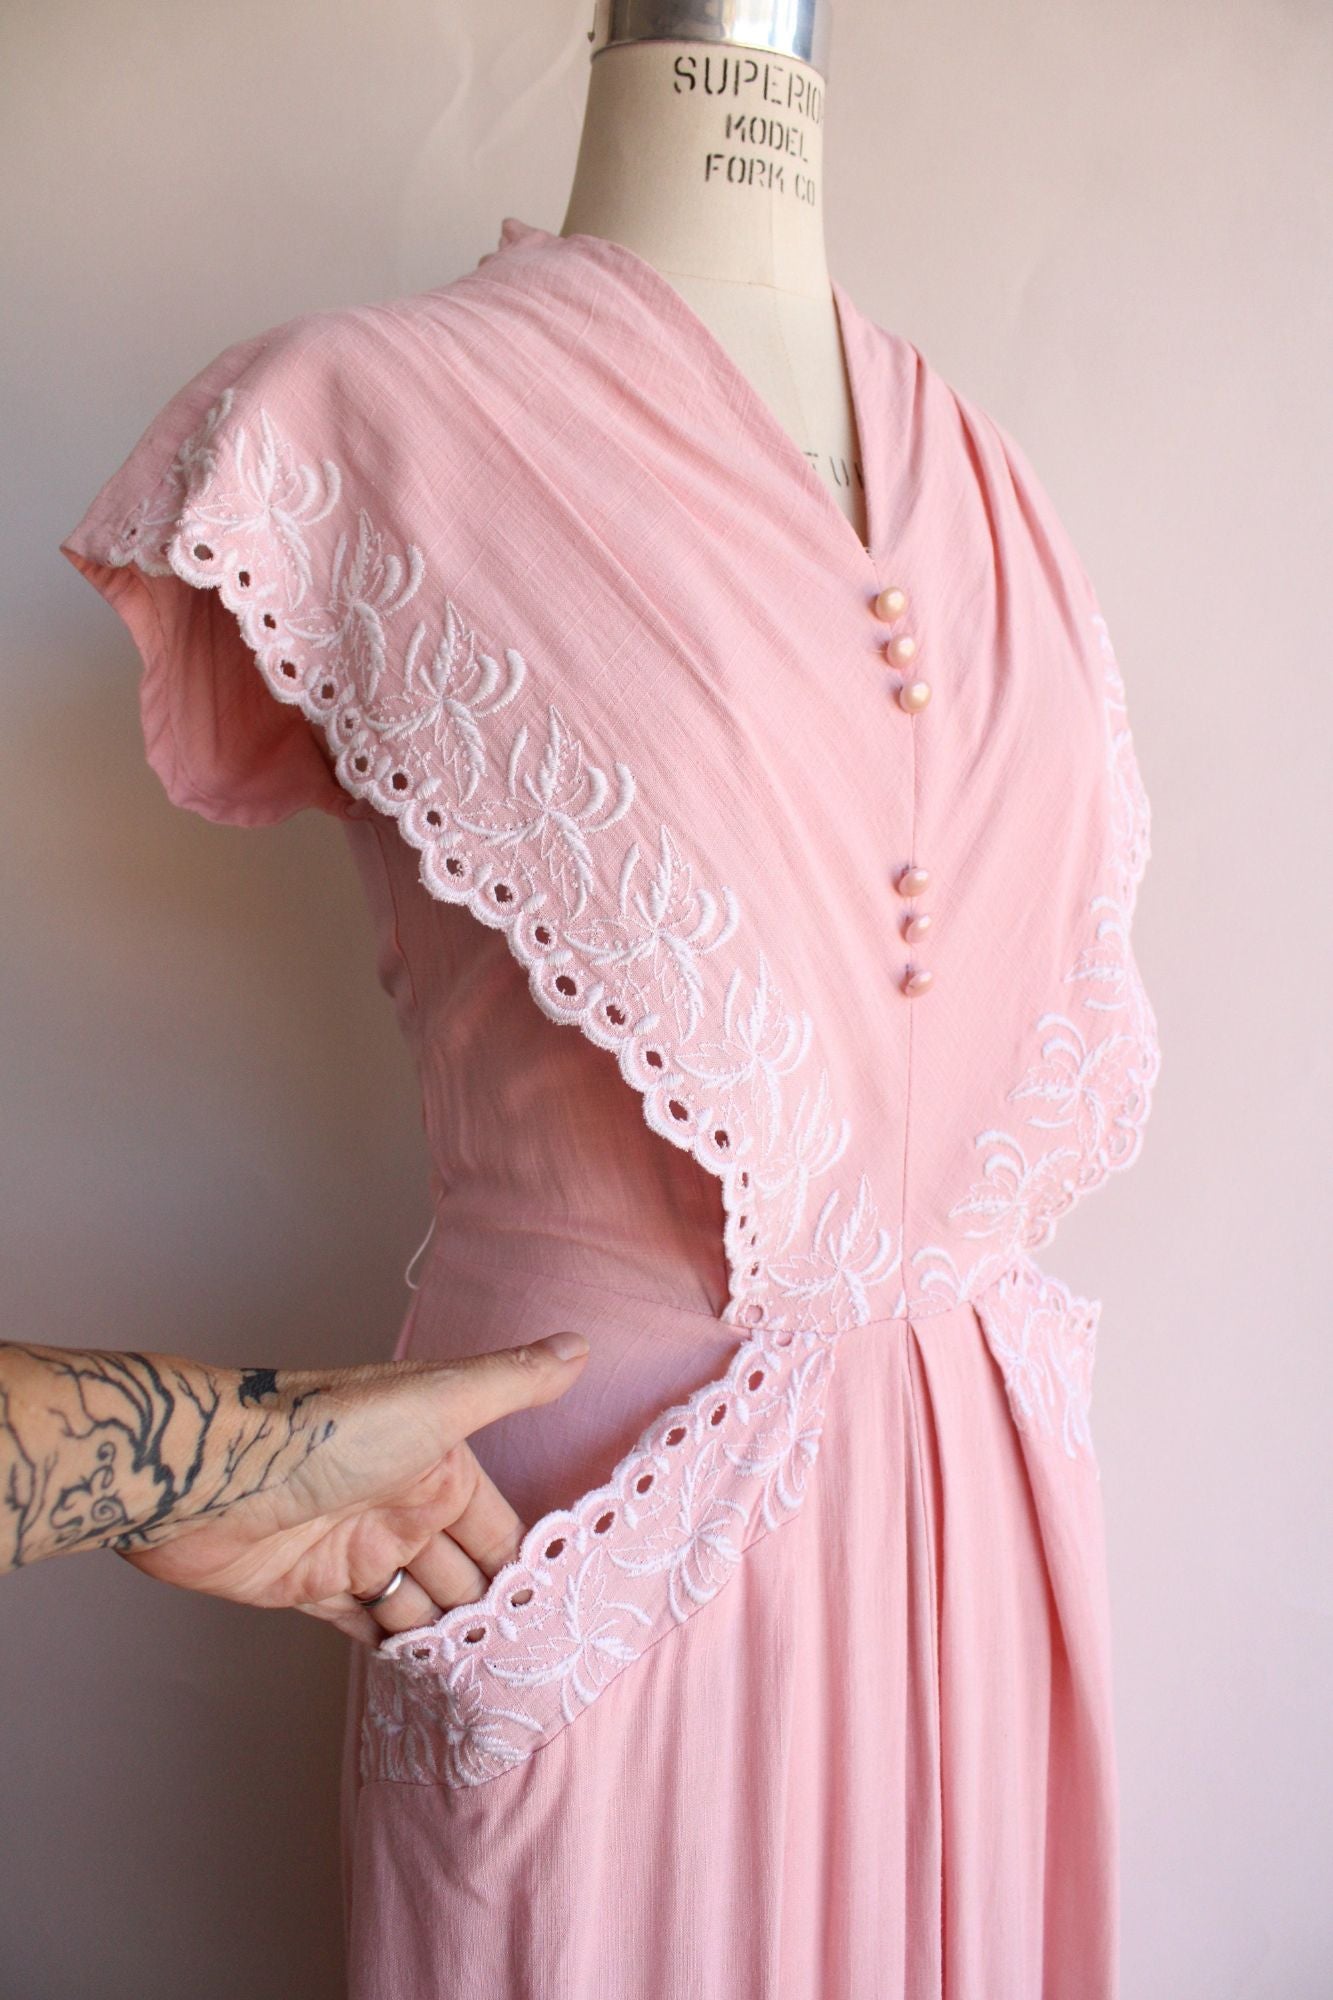 Vintage 1950s  Pink with White Floral Embroidery Cotton Day Dress